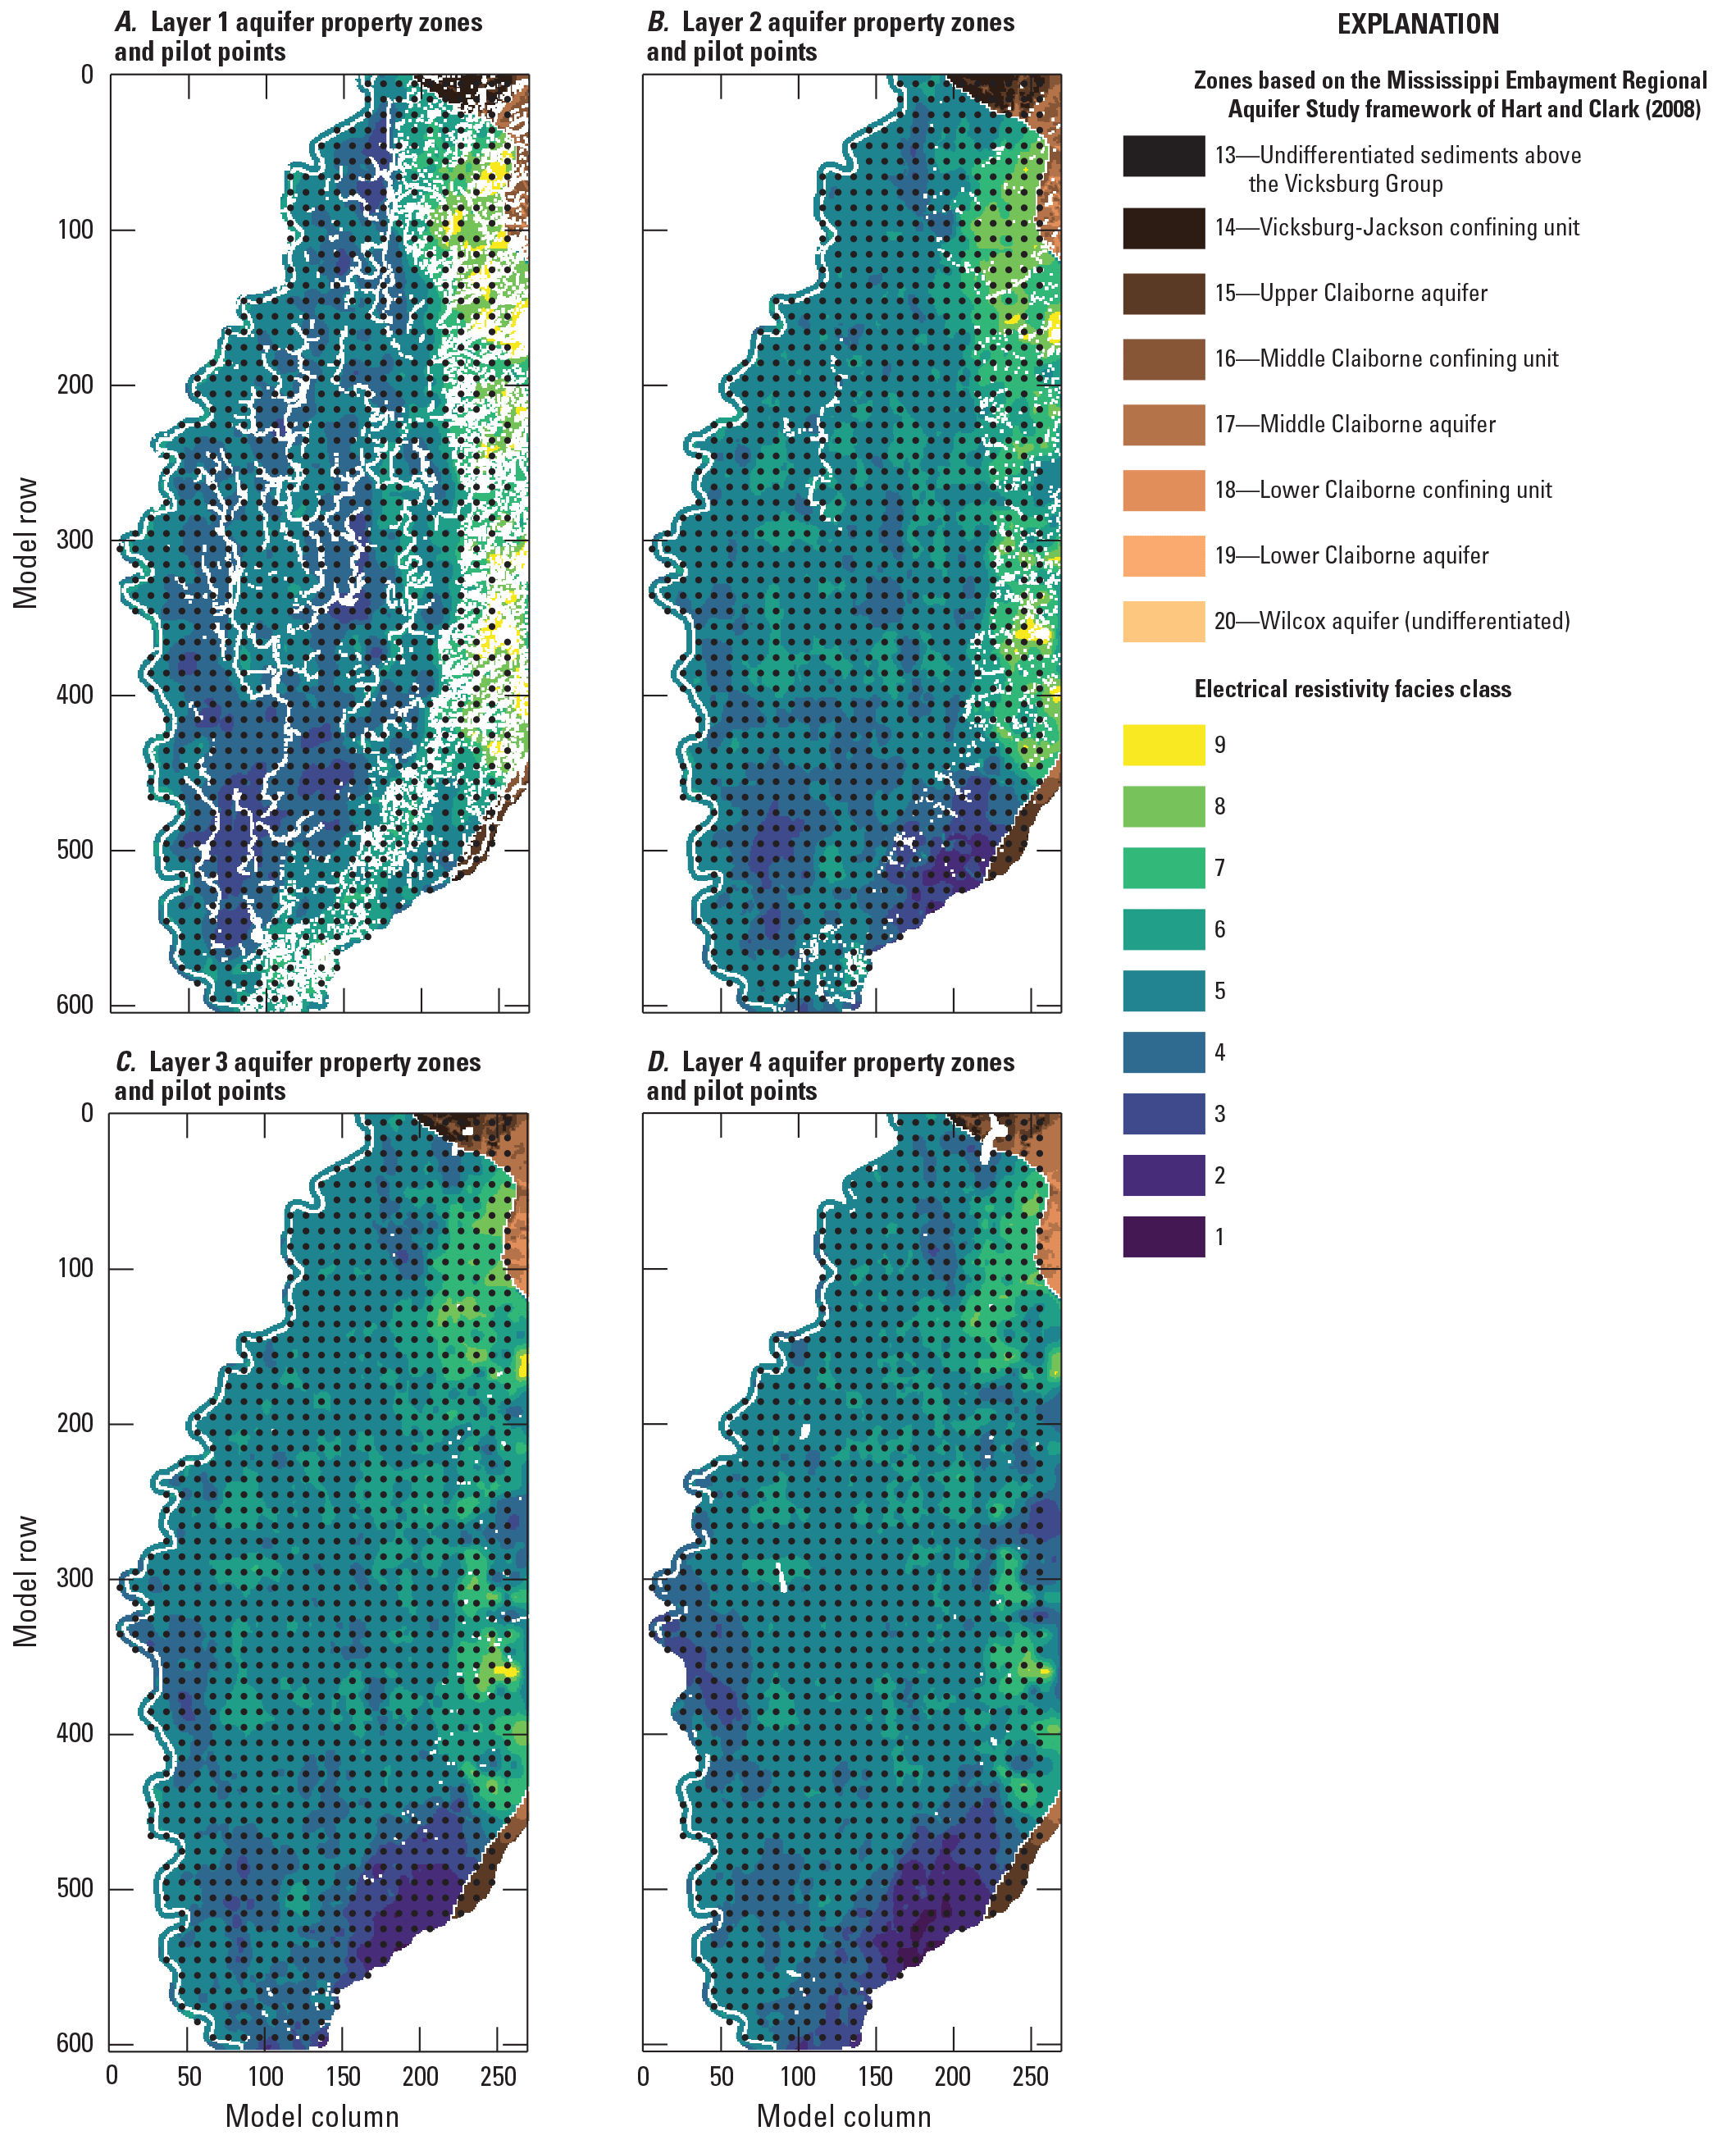 Each of the top 15 layers has different zones based on electrical resistivities. Layers
                     below each have a single zone based on a hydrostratigraphic unit of Hart and others
                     (2008).